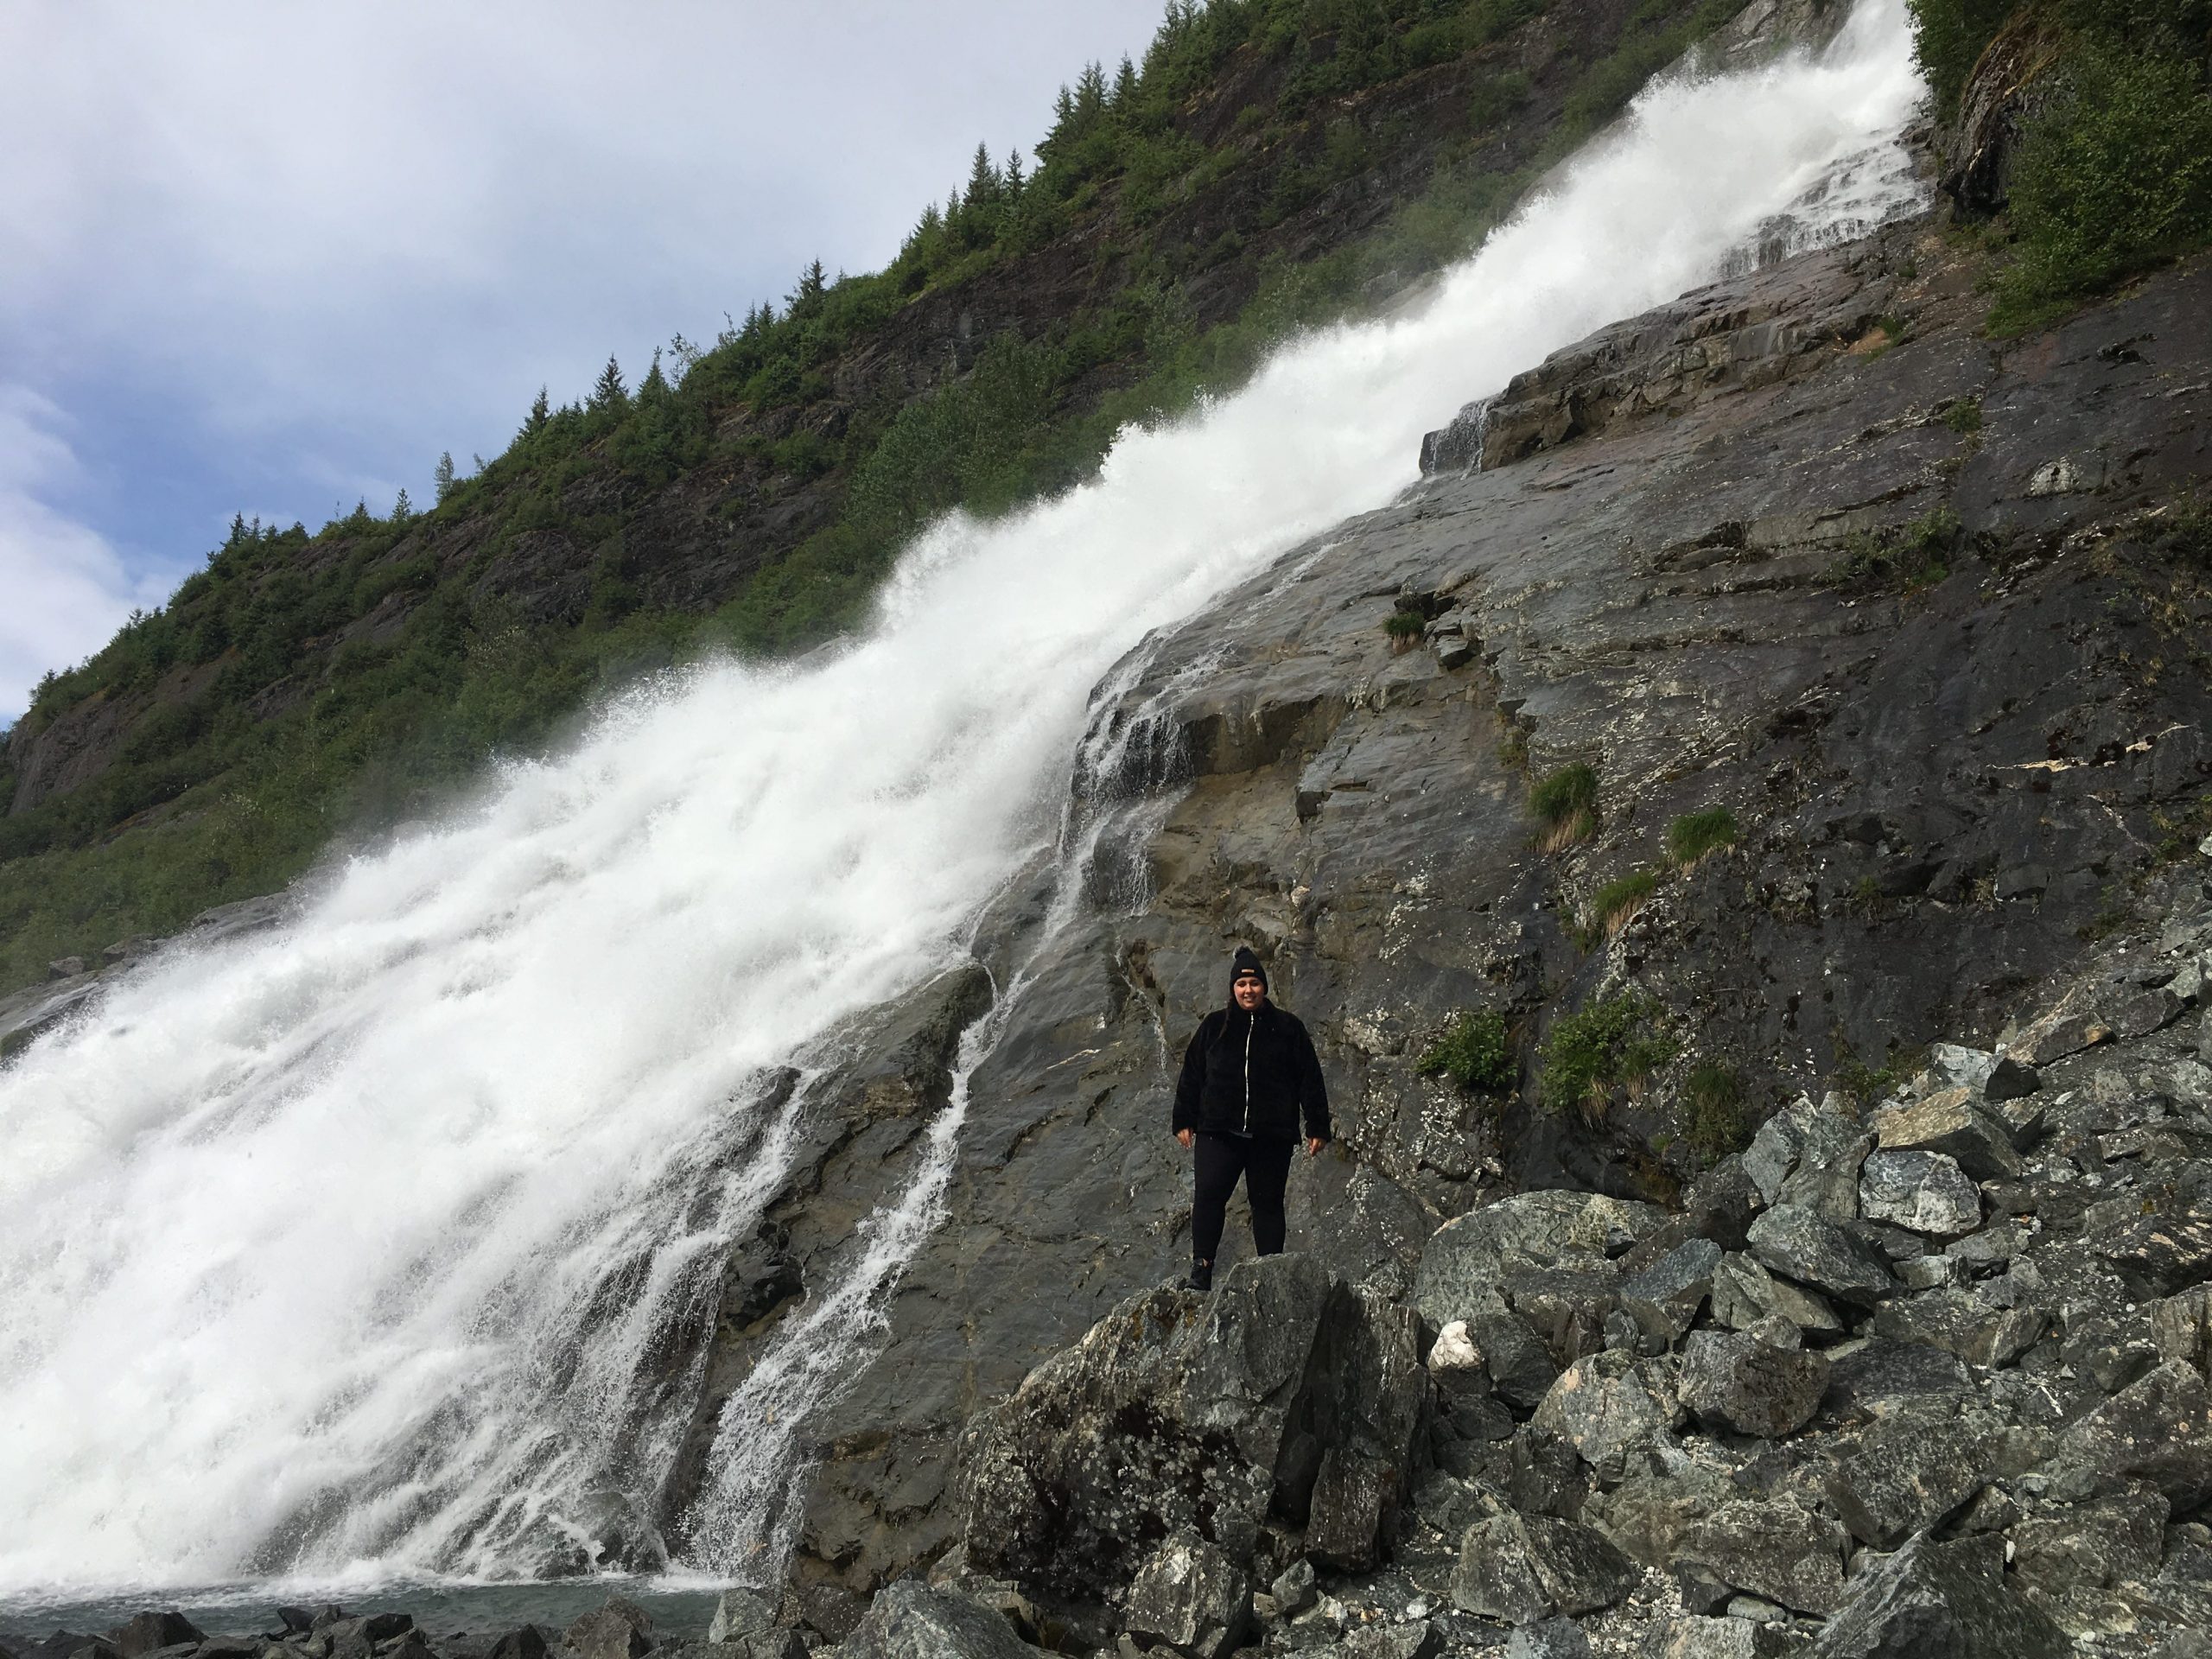 The writer standing on a rock formation with a waterfall in the background